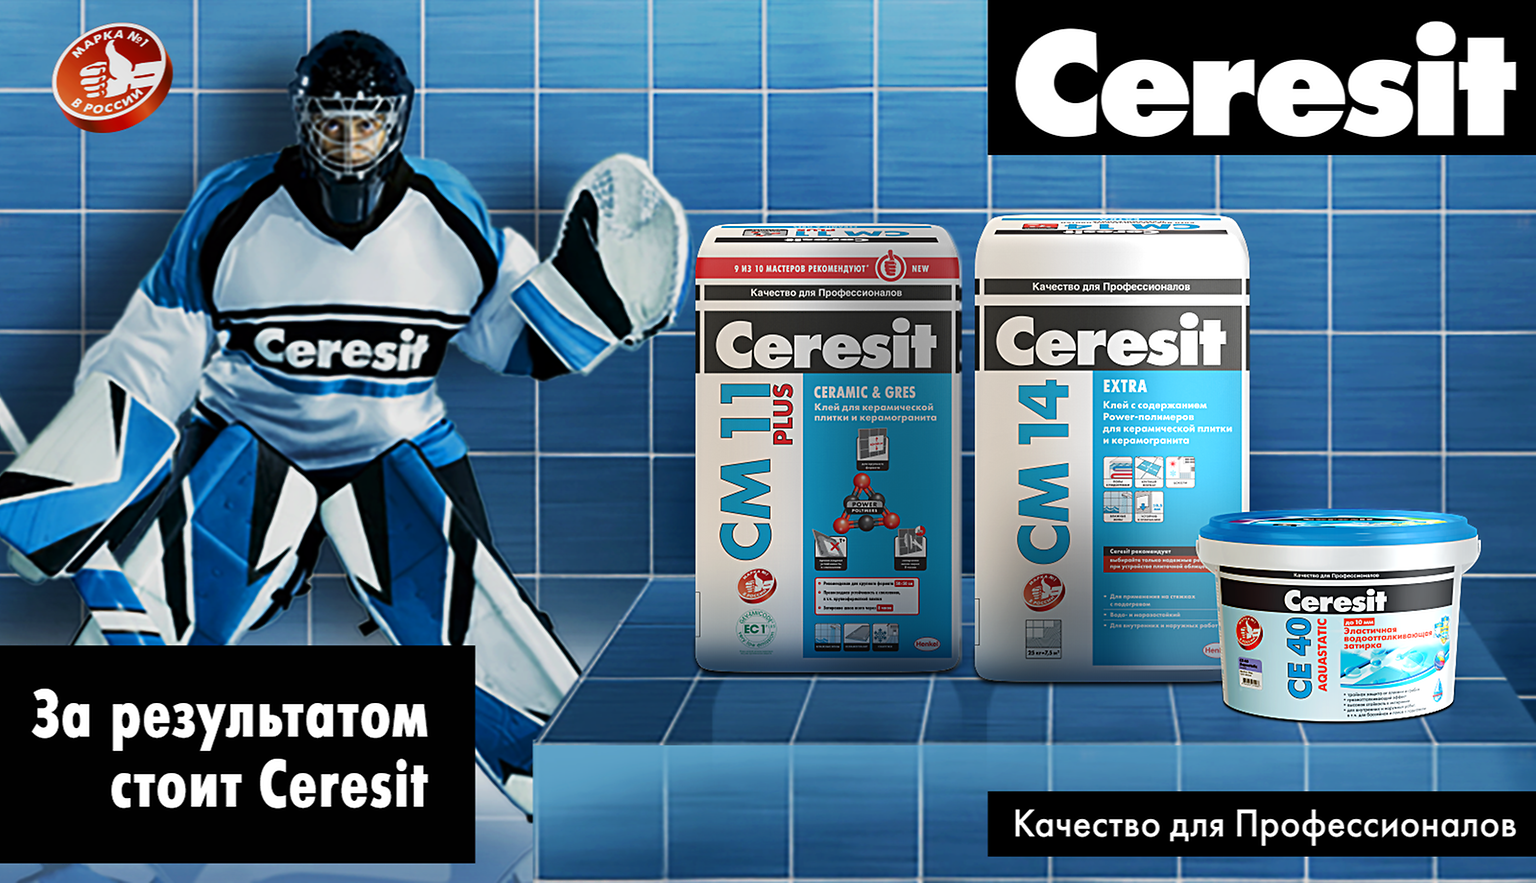 The Ceresit advertizing campaign